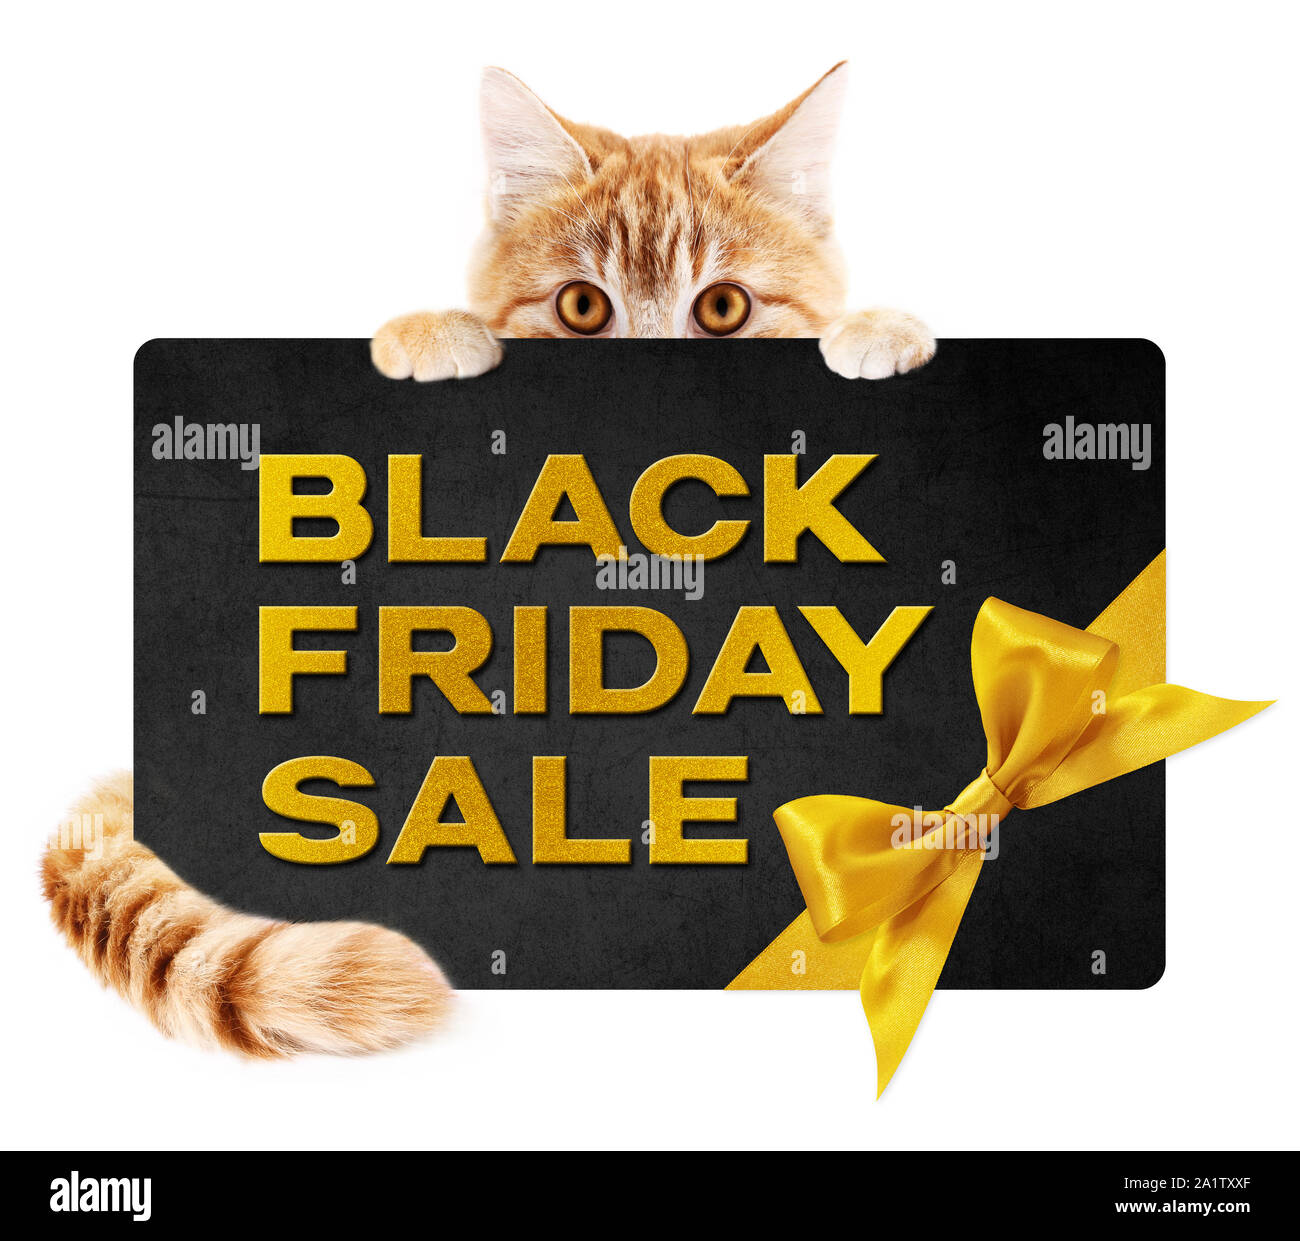 funny pet cat showing black friday sale golden text written on black gift card with ribbon bow isolated on white background Stock Photo